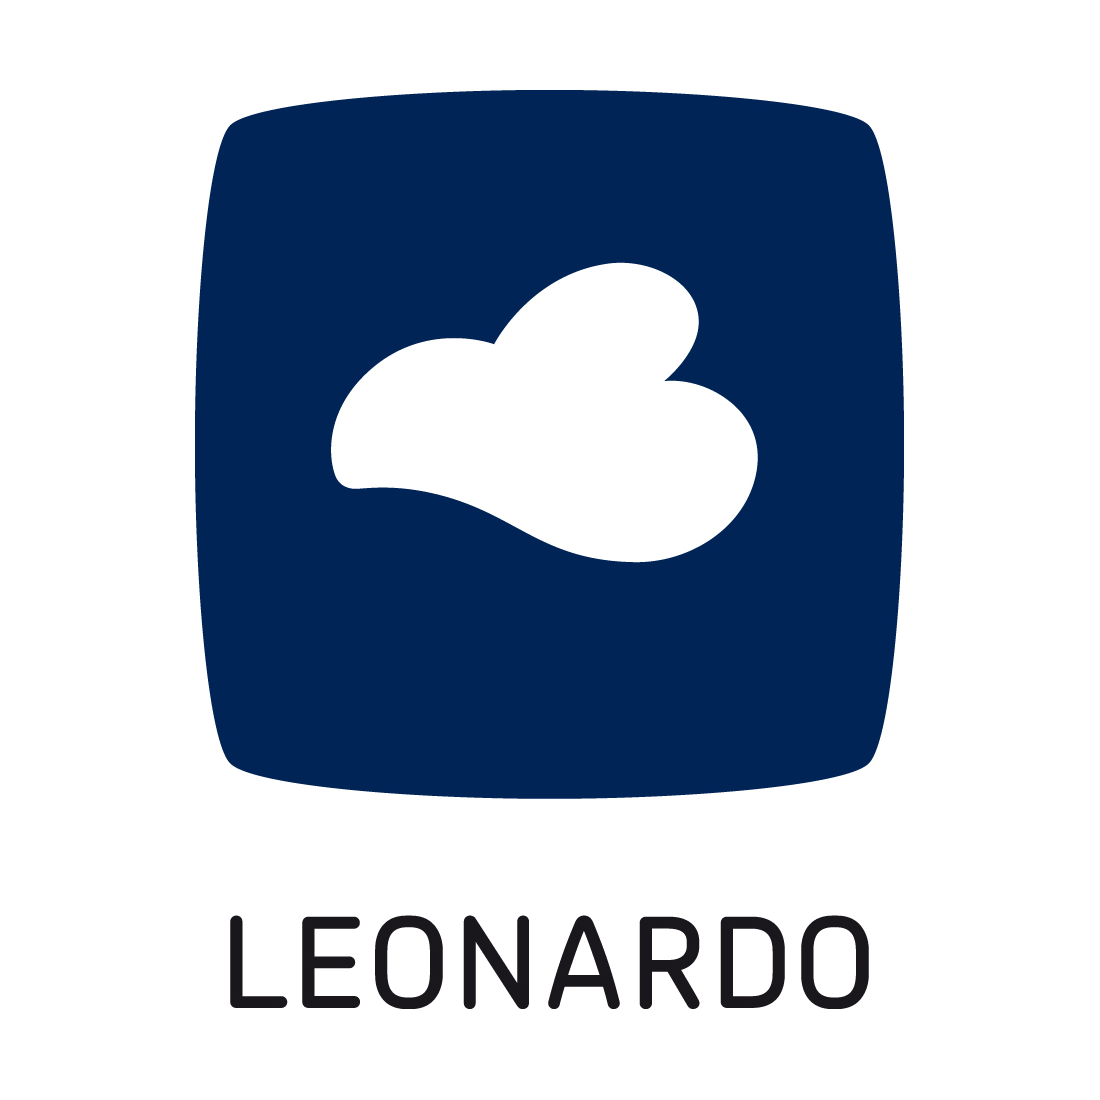 View our collection of Leonardo Port Accessories